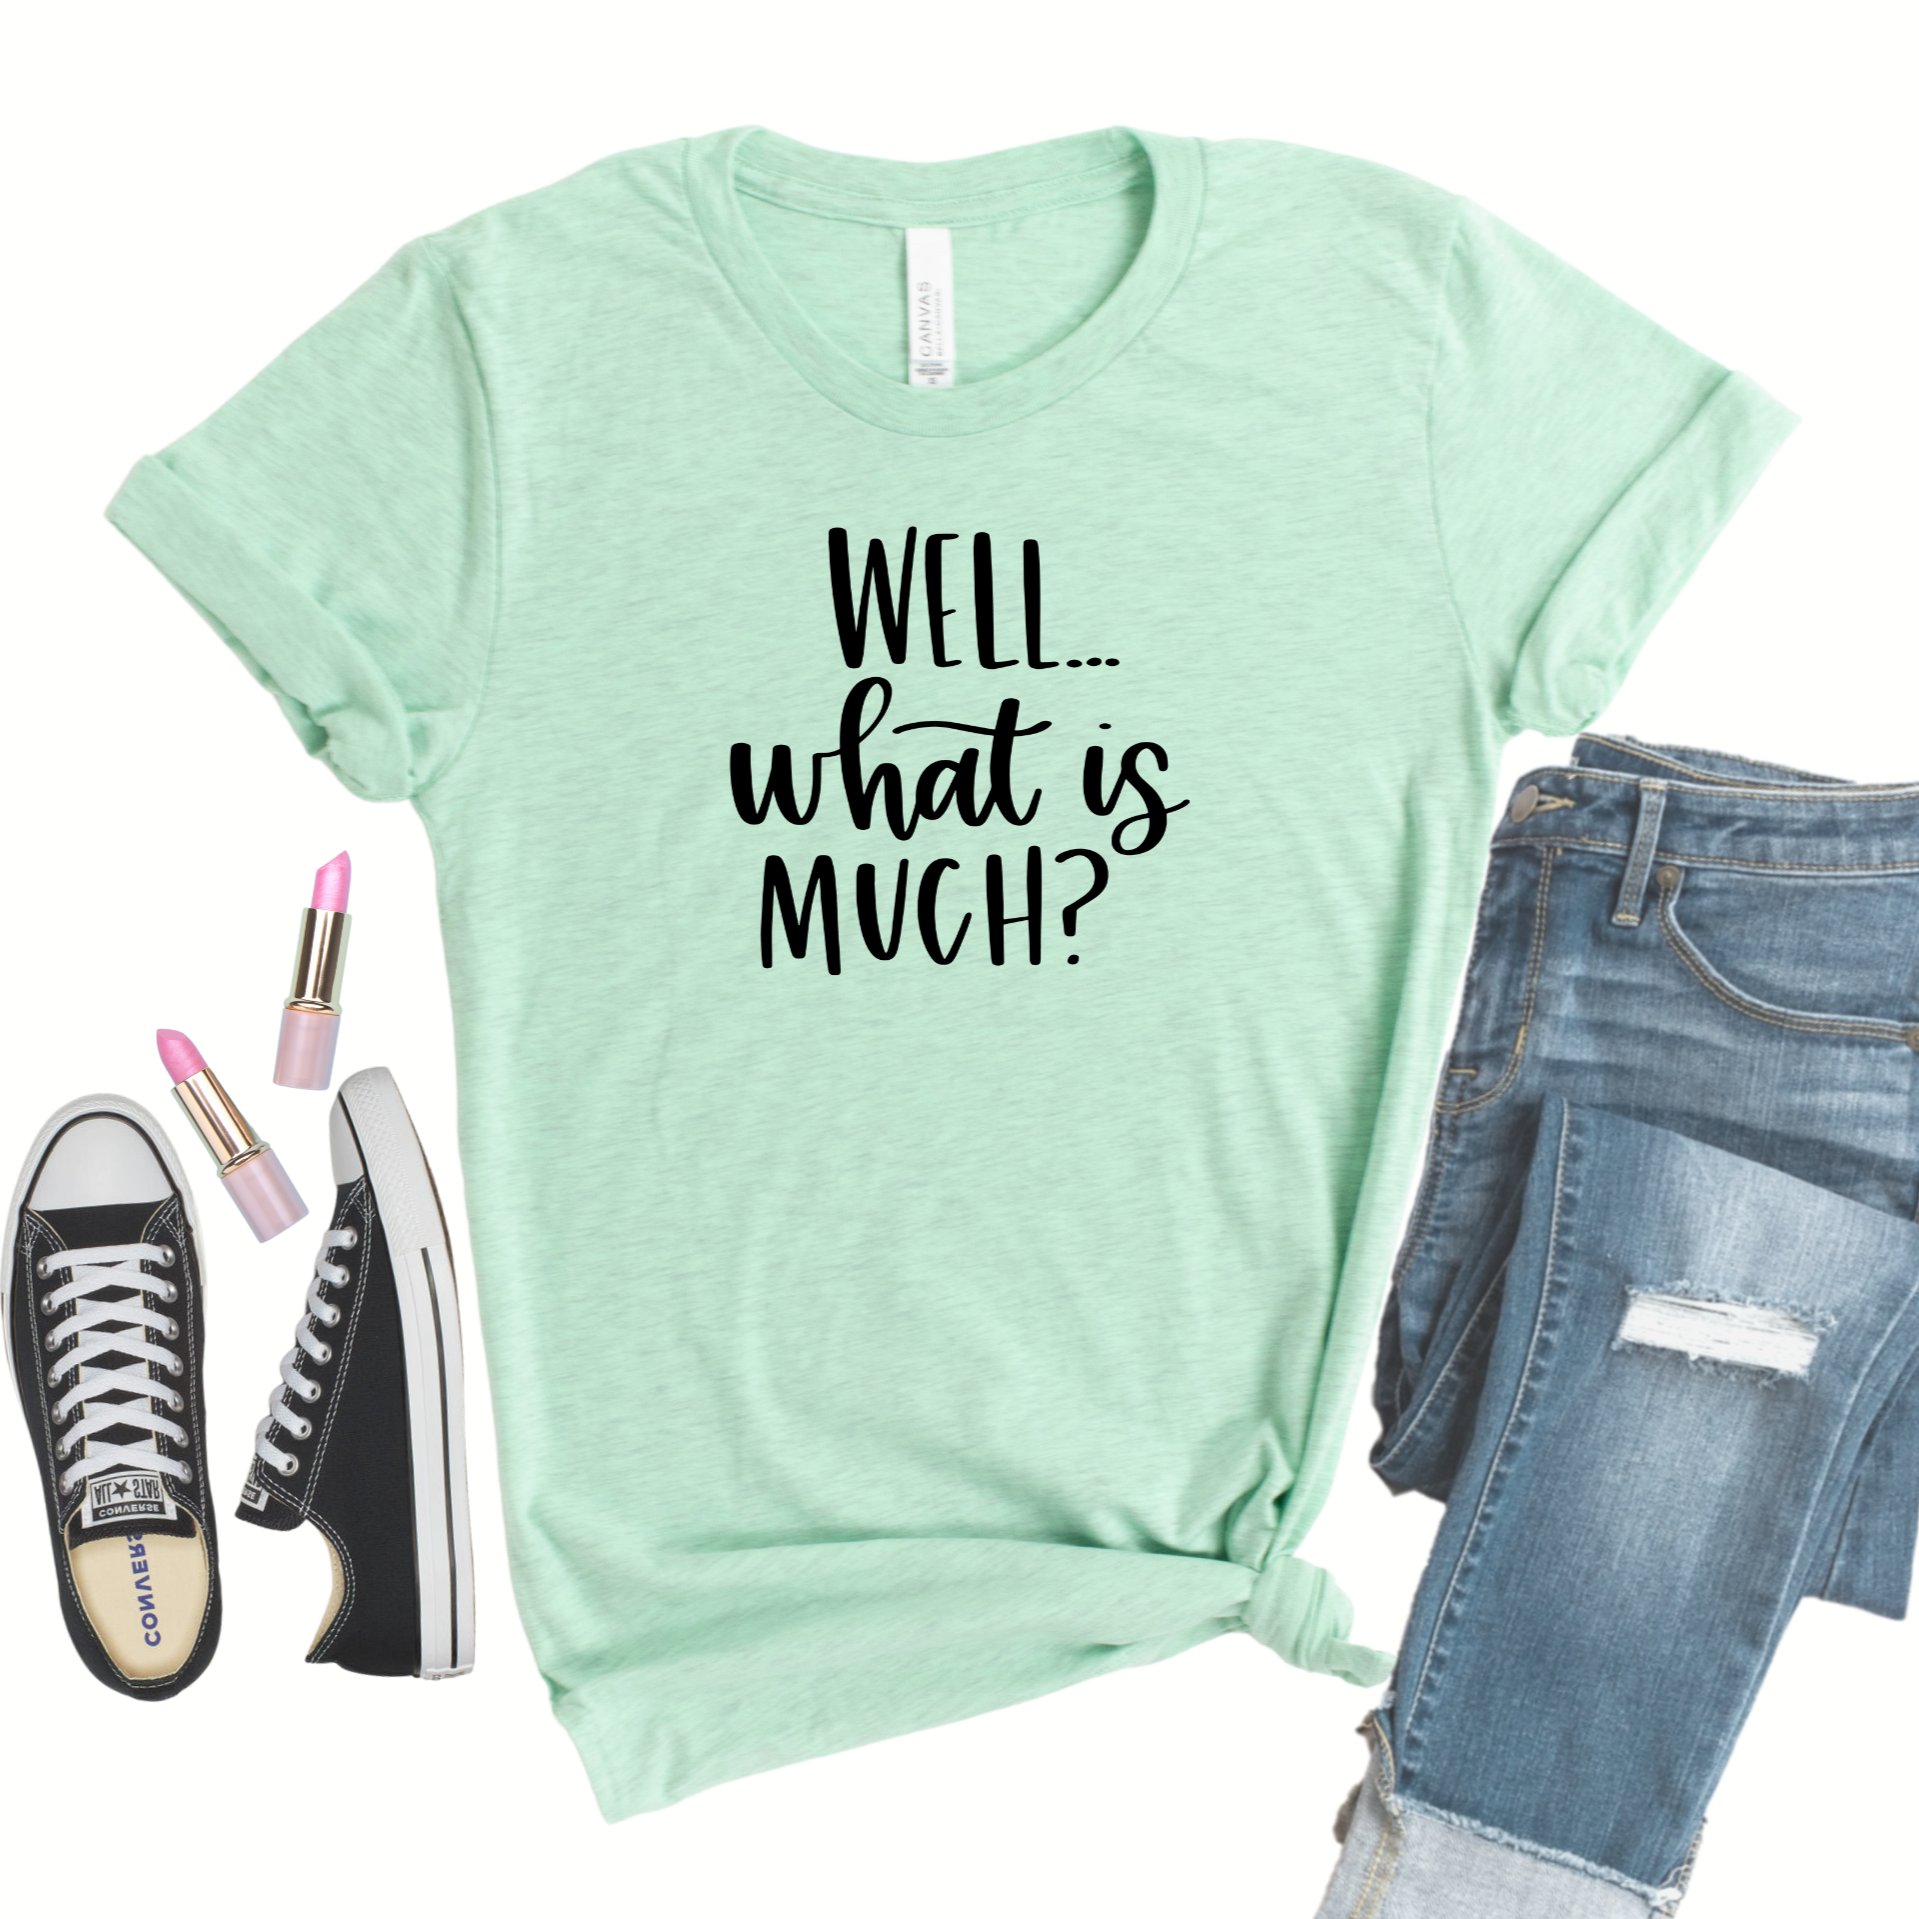 Well...what is much? in black on a heather prism mint Bella Canvas 3001cvc t-shirt.